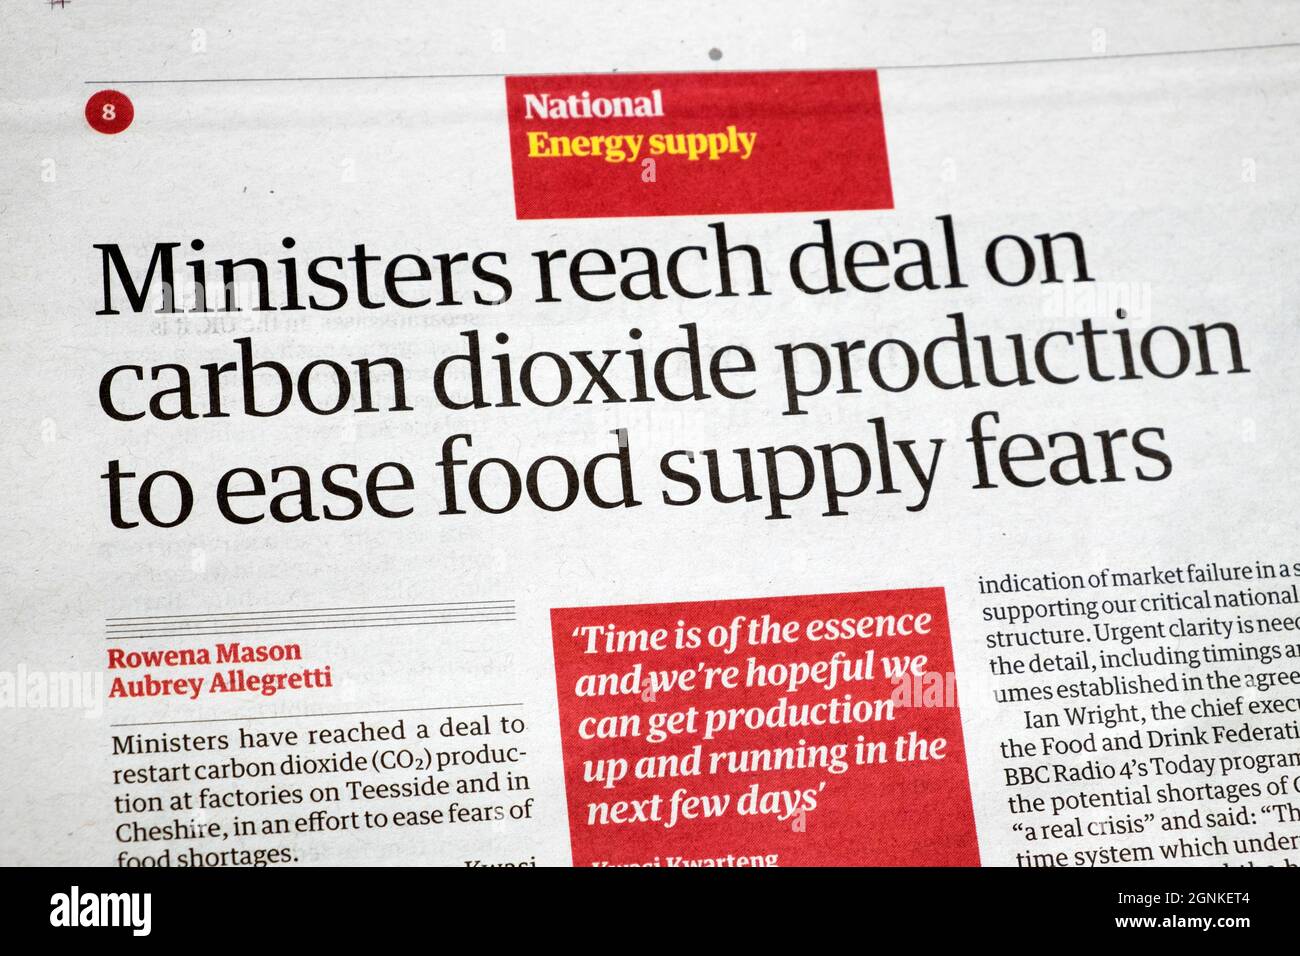 Government 'Ministers reach deal on carbon dioxide production to ease food supply fears' Guardian newspaper headline energy supply 22 Sept 2021 Stock Photo